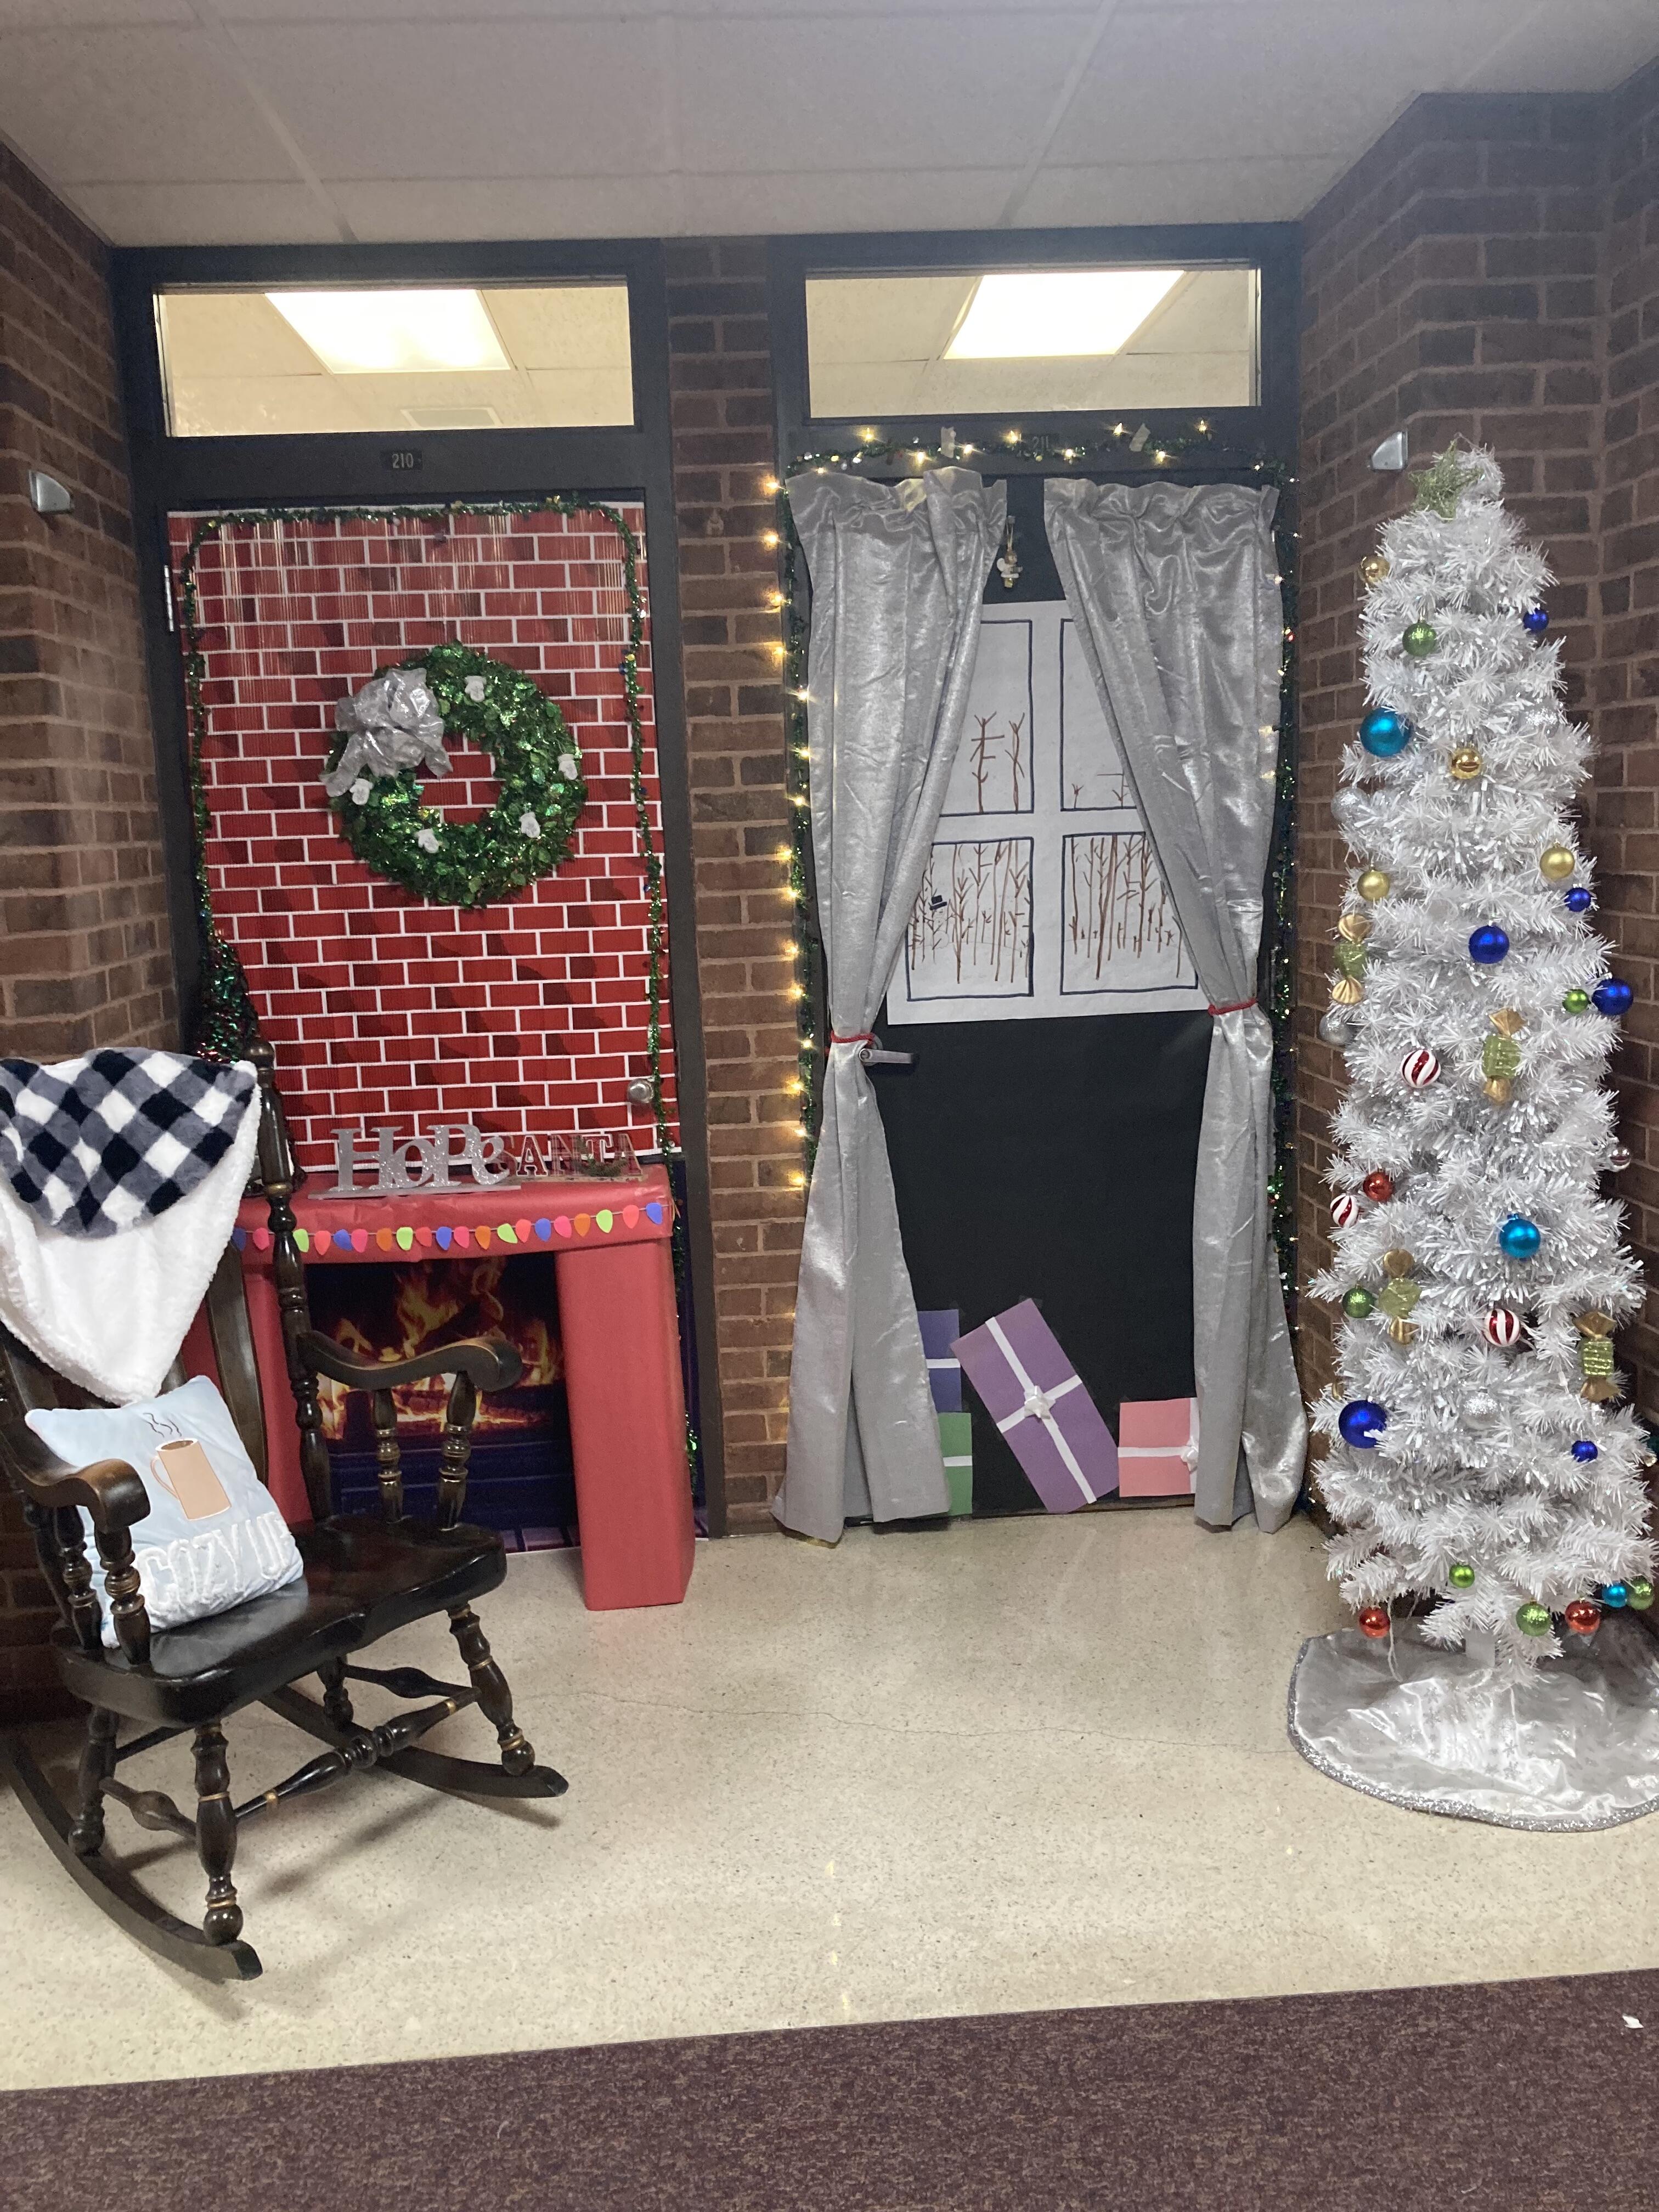 Two classroom doors are decorated to celebrate the holiday season. One is made to look like a Christmas present, while the other has a winter theme.